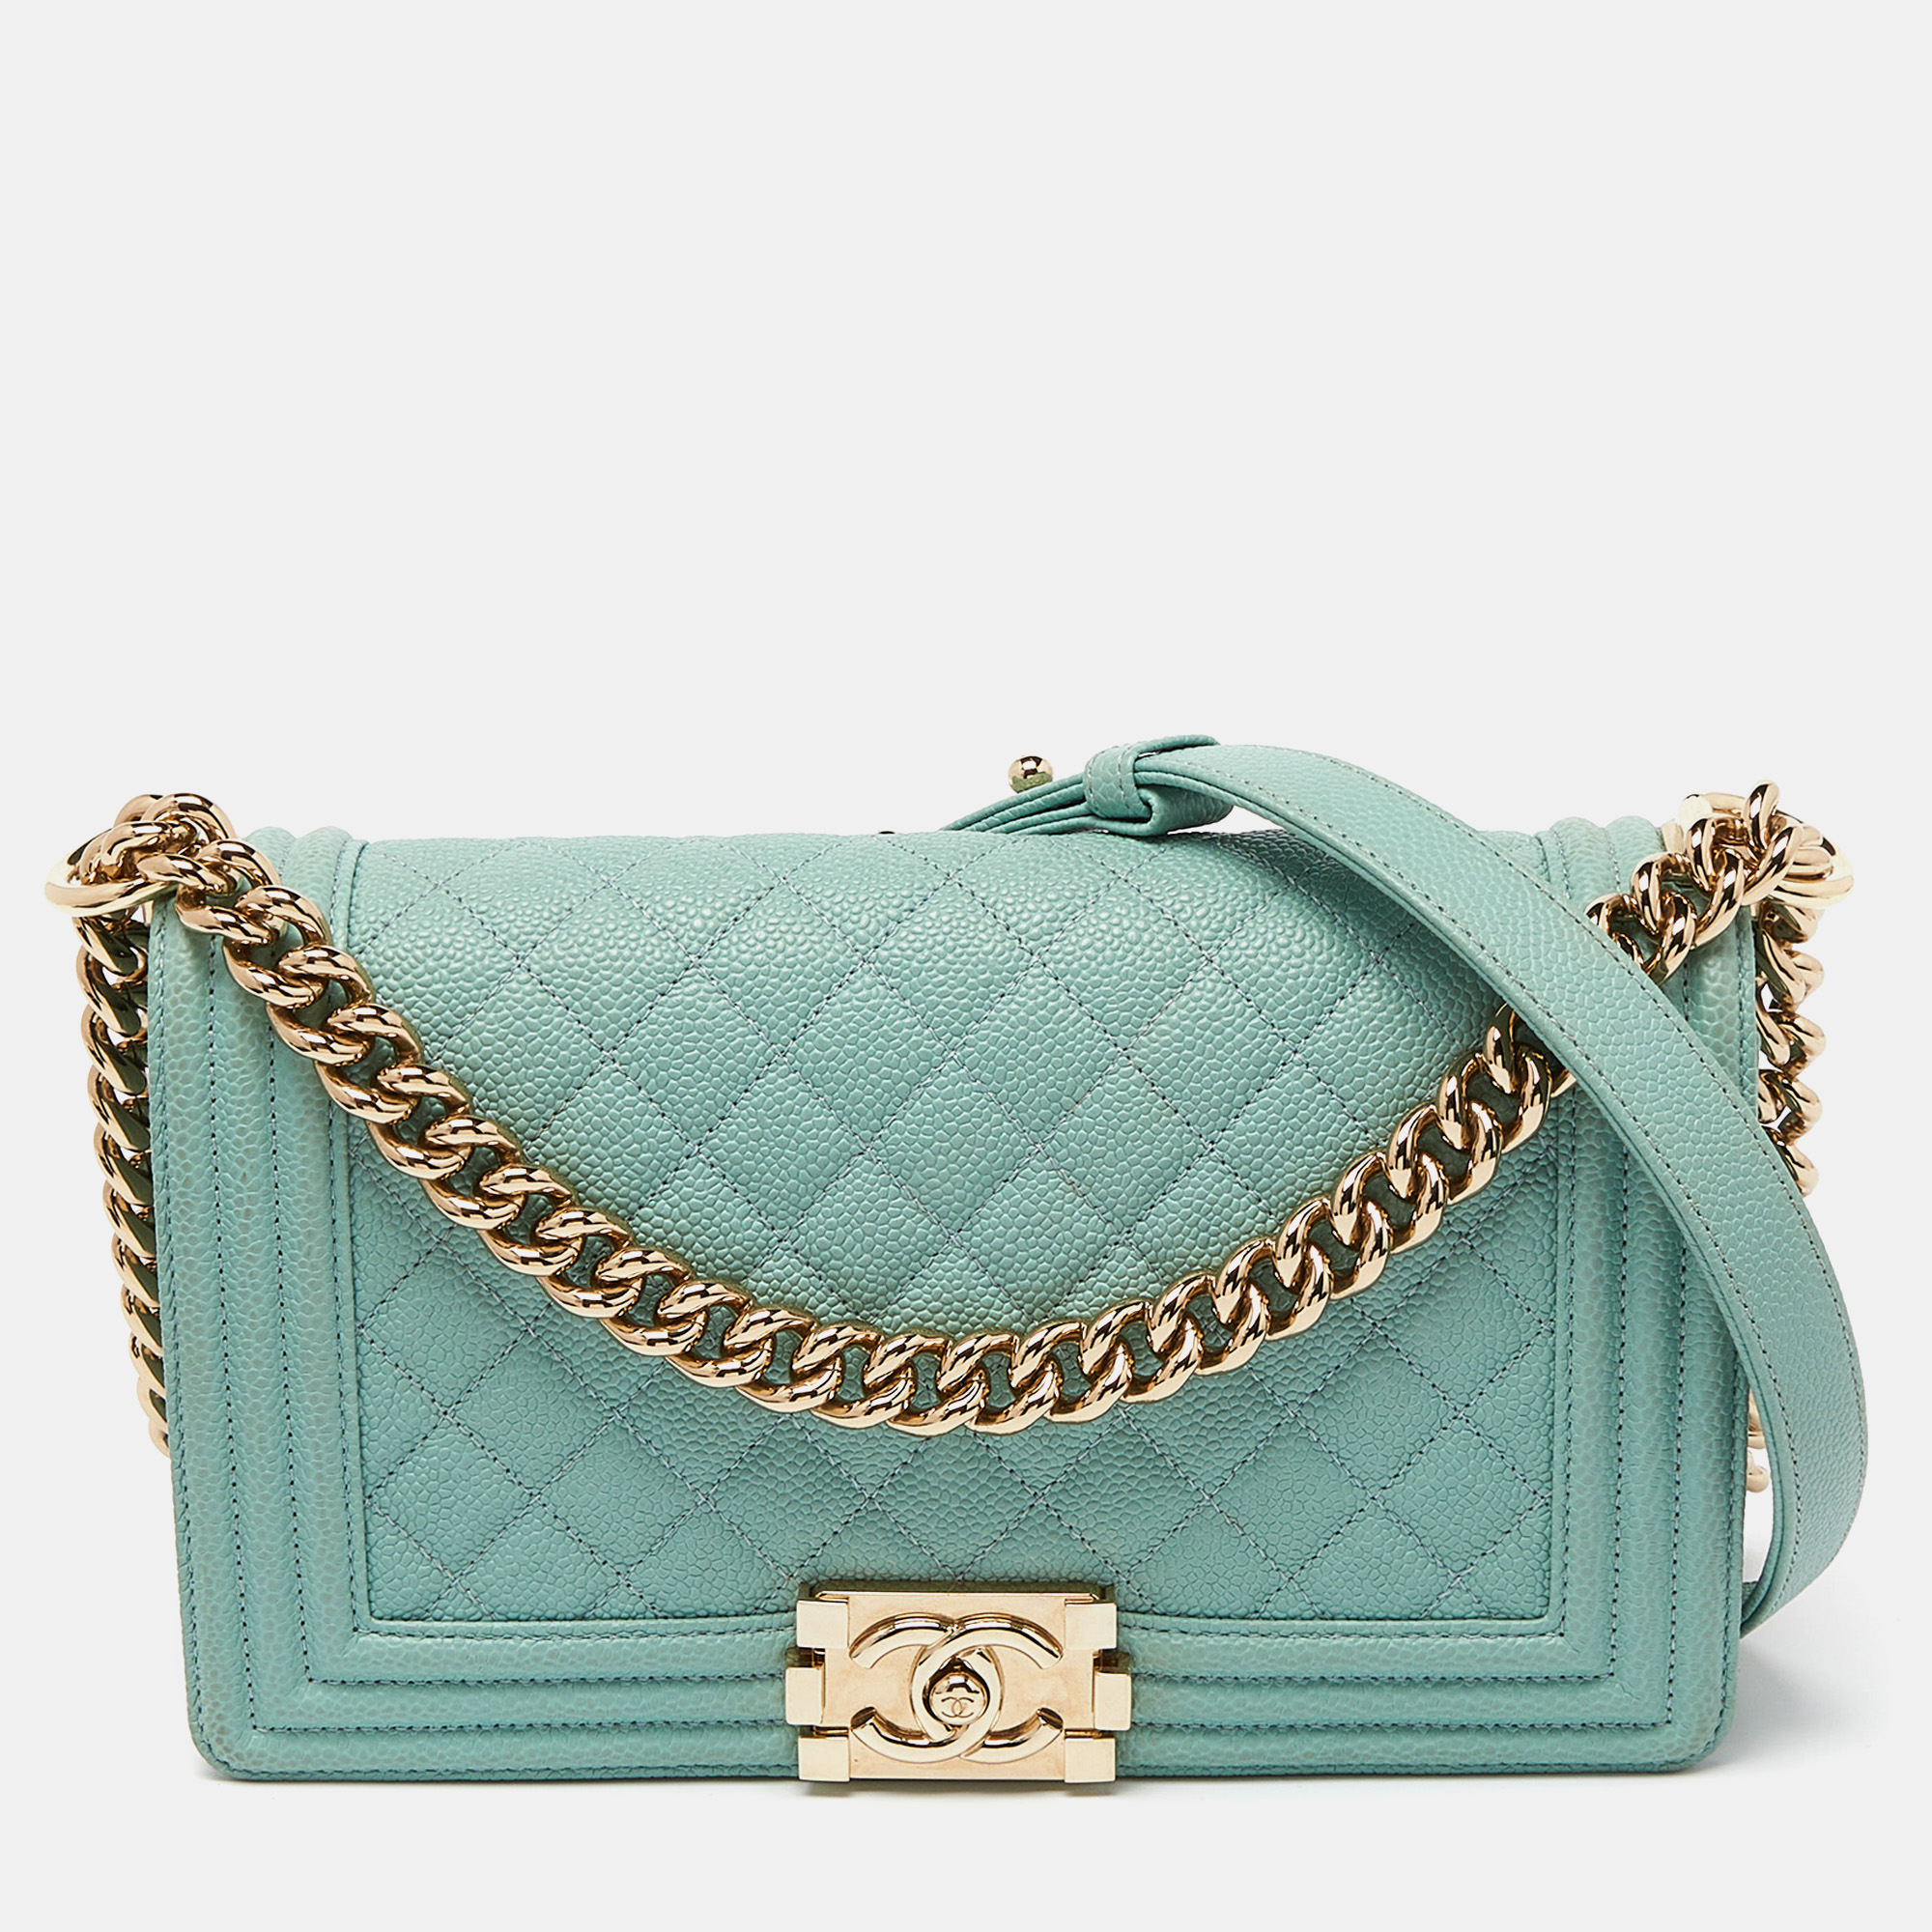 Chanel green quilted caviar leather medium boy flap bag